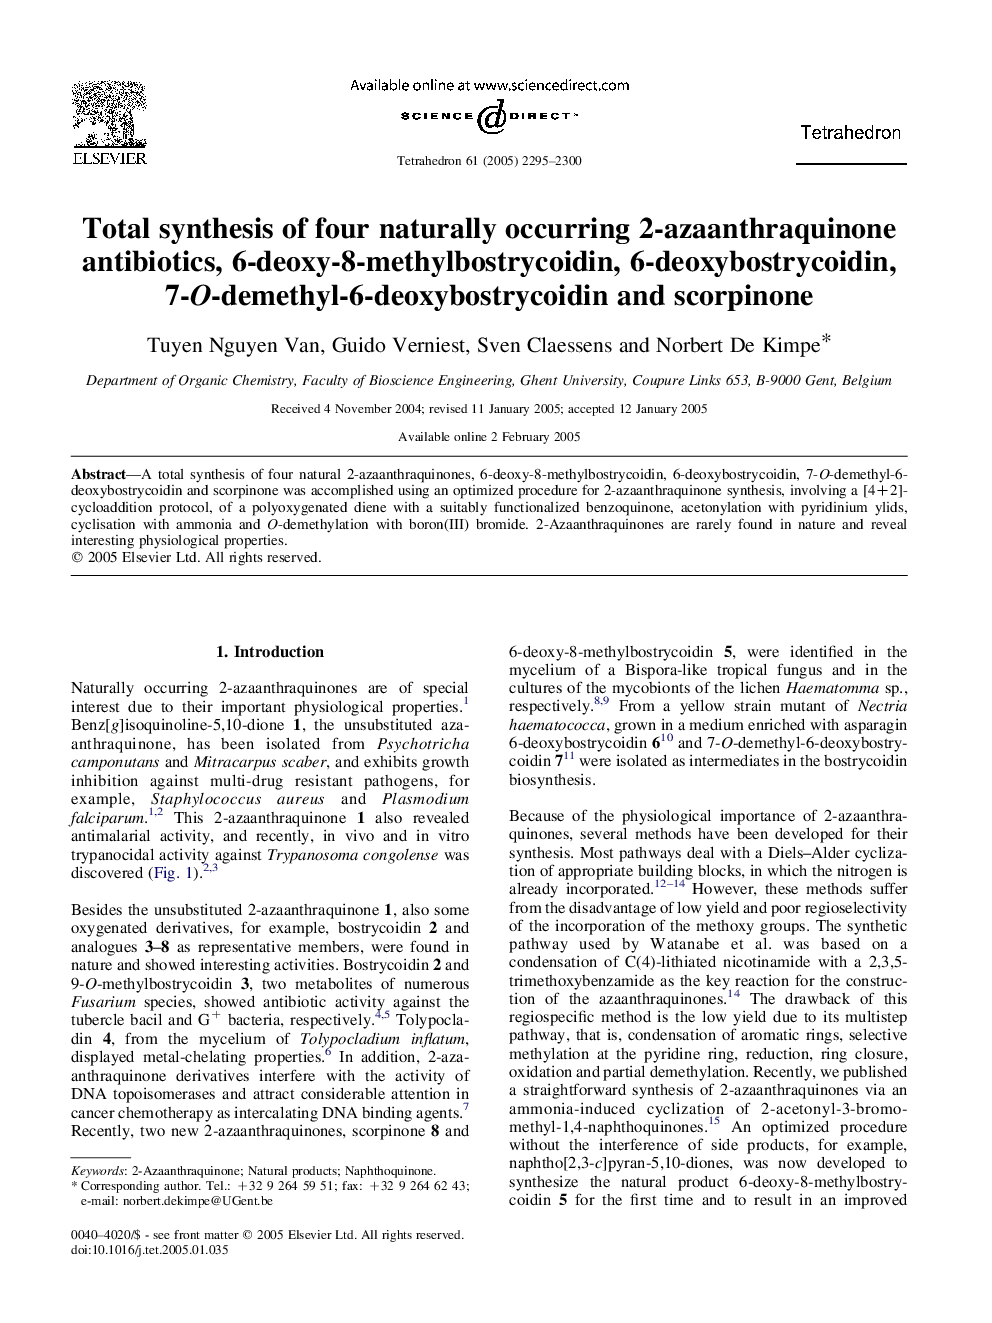 Total synthesis of four naturally occurring 2-azaanthraquinone antibiotics, 6-deoxy-8-methylbostrycoidin, 6-deoxybostrycoidin, 7-O-demethyl-6-deoxybostrycoidin and scorpinone